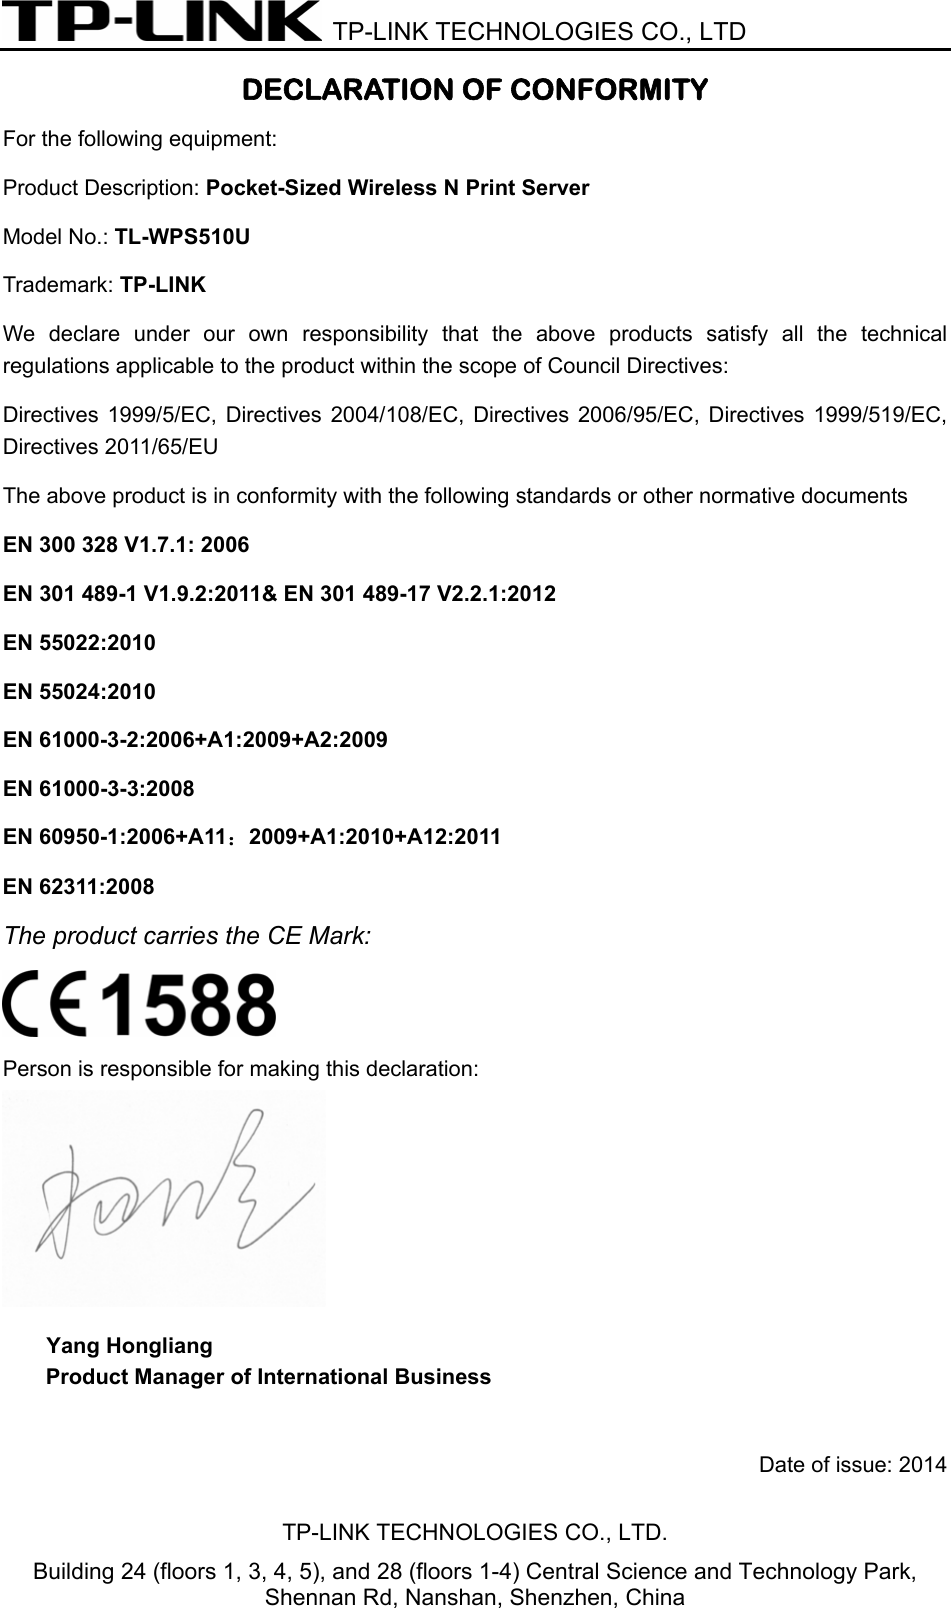  TP-LINK TECHNOLOGIES CO., LTD DECLARATION OF CONFORMITY For the following equipment: Product Description: Pocket-Sized Wireless N Print Server Model No.: TL-WPS510U Trademark: TP-LINK    We declare under our own responsibility that the above products satisfy all the technical regulations applicable to the product within the scope of Council Directives:     Directives 1999/5/EC, Directives 2004/108/EC, Directives 2006/95/EC, Directives 1999/519/EC, Directives 2011/65/EU The above product is in conformity with the following standards or other normative documents EN 300 328 V1.7.1: 2006 EN 301 489-1 V1.9.2:2011&amp; EN 301 489-17 V2.2.1:2012 EN 55022:2010 EN 55024:2010 EN 61000-3-2:2006+A1:2009+A2:2009 EN 61000-3-3:2008 EN 60950-1:2006+A11：2009+A1:2010+A12:2011 EN 62311:2008 The product carries the CE Mark:  Person is responsible for making this declaration:  Yang Hongliang Product Manager of International Business    Date of issue: 2014   TP-LINK TECHNOLOGIES CO., LTD. Building 24 (floors 1, 3, 4, 5), and 28 (floors 1-4) Central Science and Technology Park, Shennan Rd, Nanshan, Shenzhen, China 